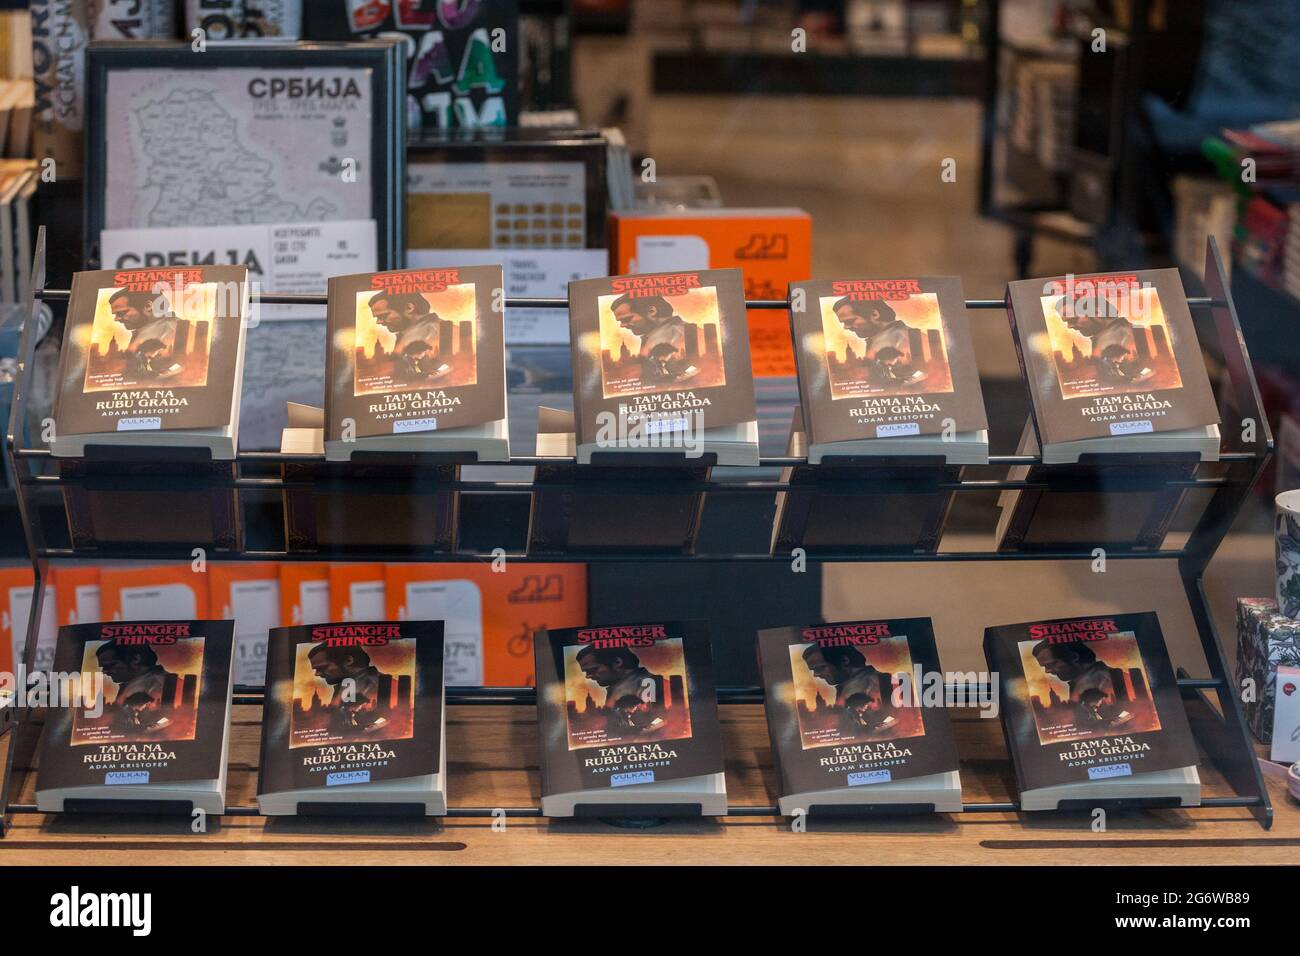 Picture of books of Stranger things, the second part of the novel